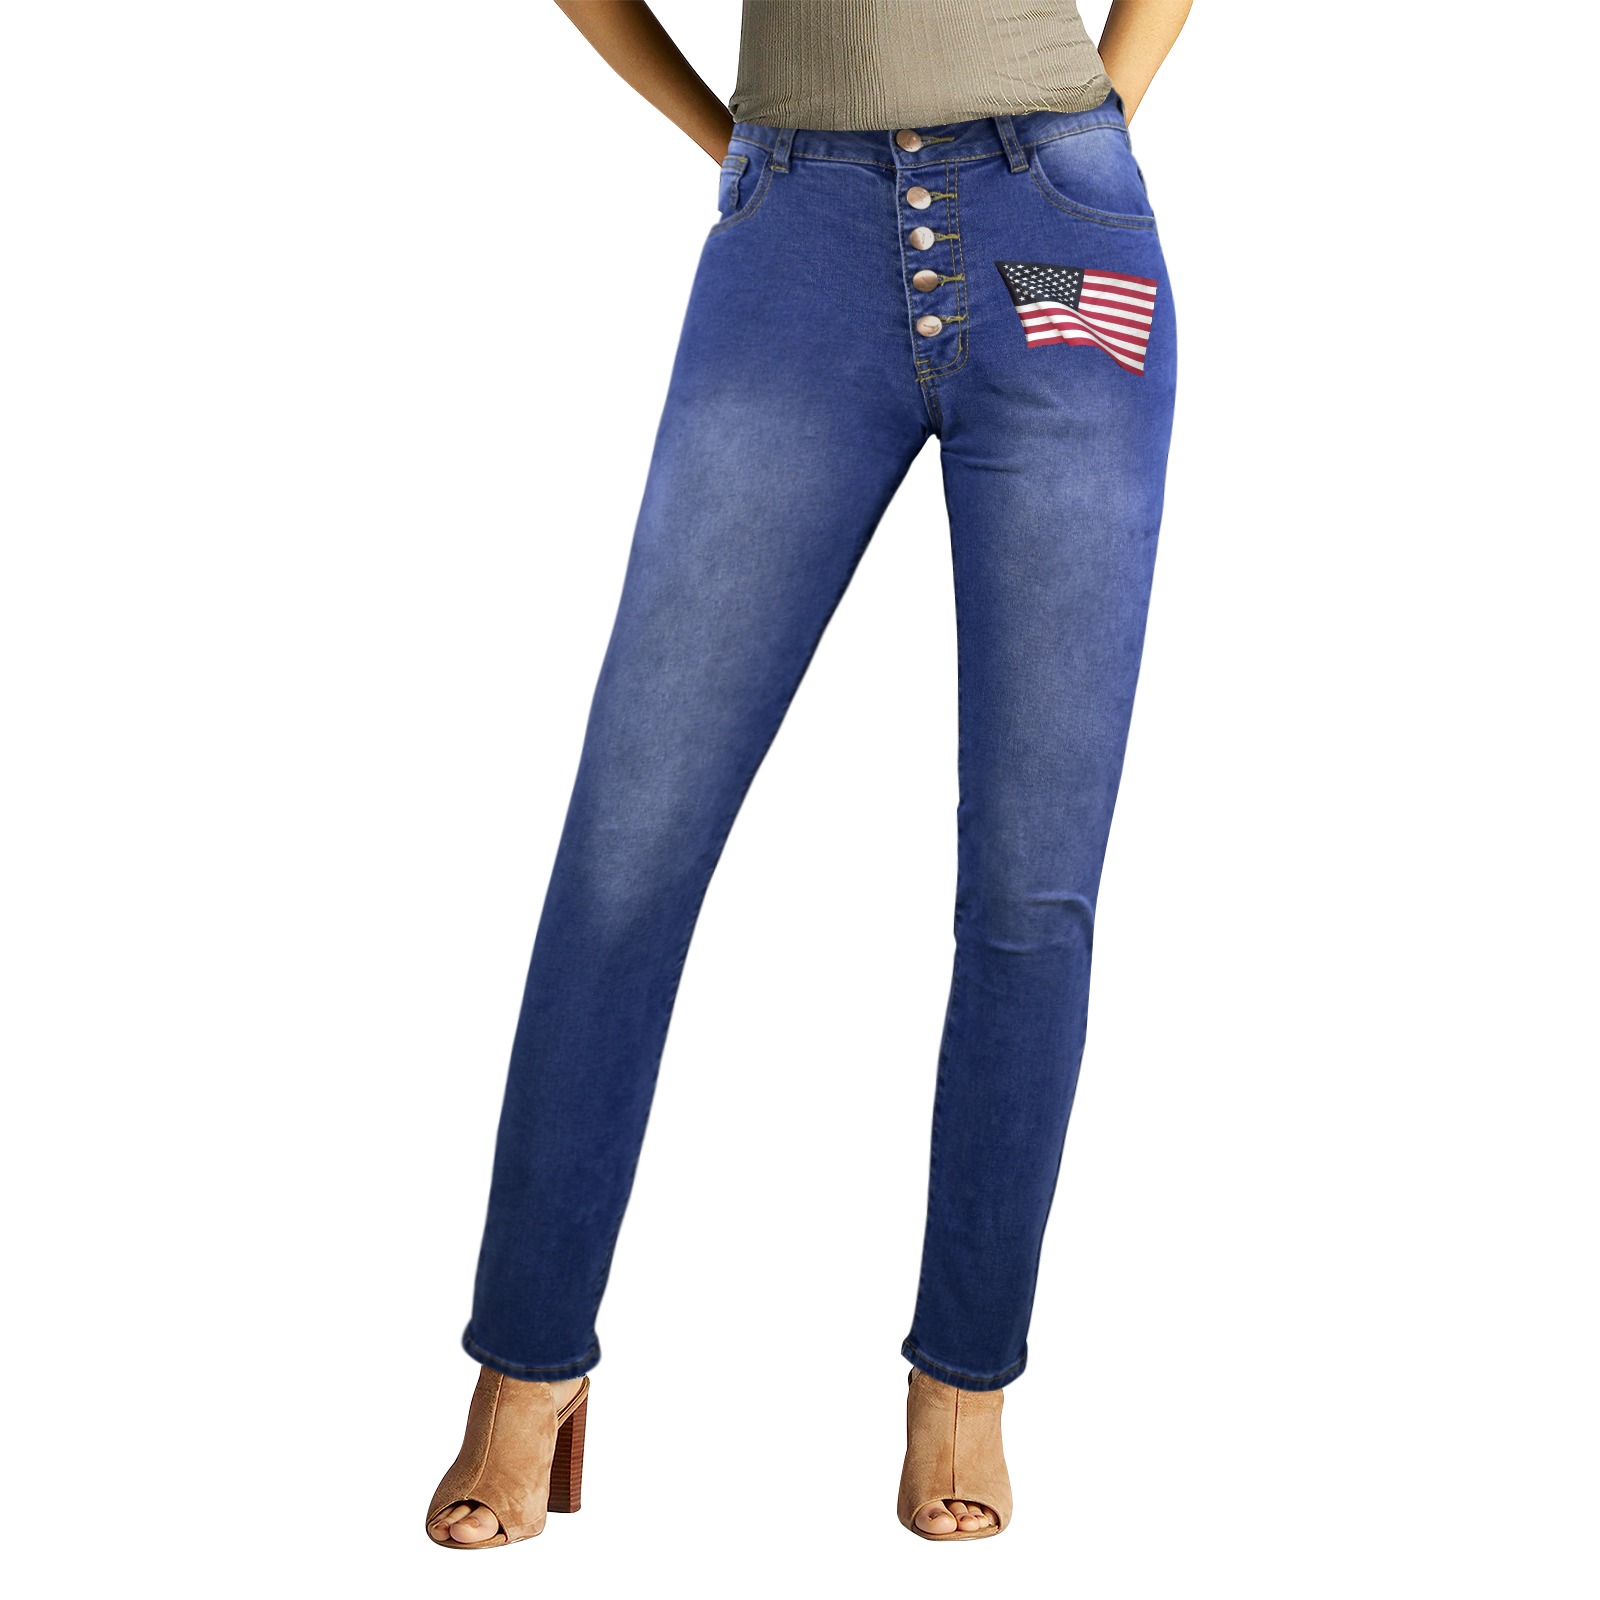 Flapping American Flags Women's Jeans (Front&Back Printing)